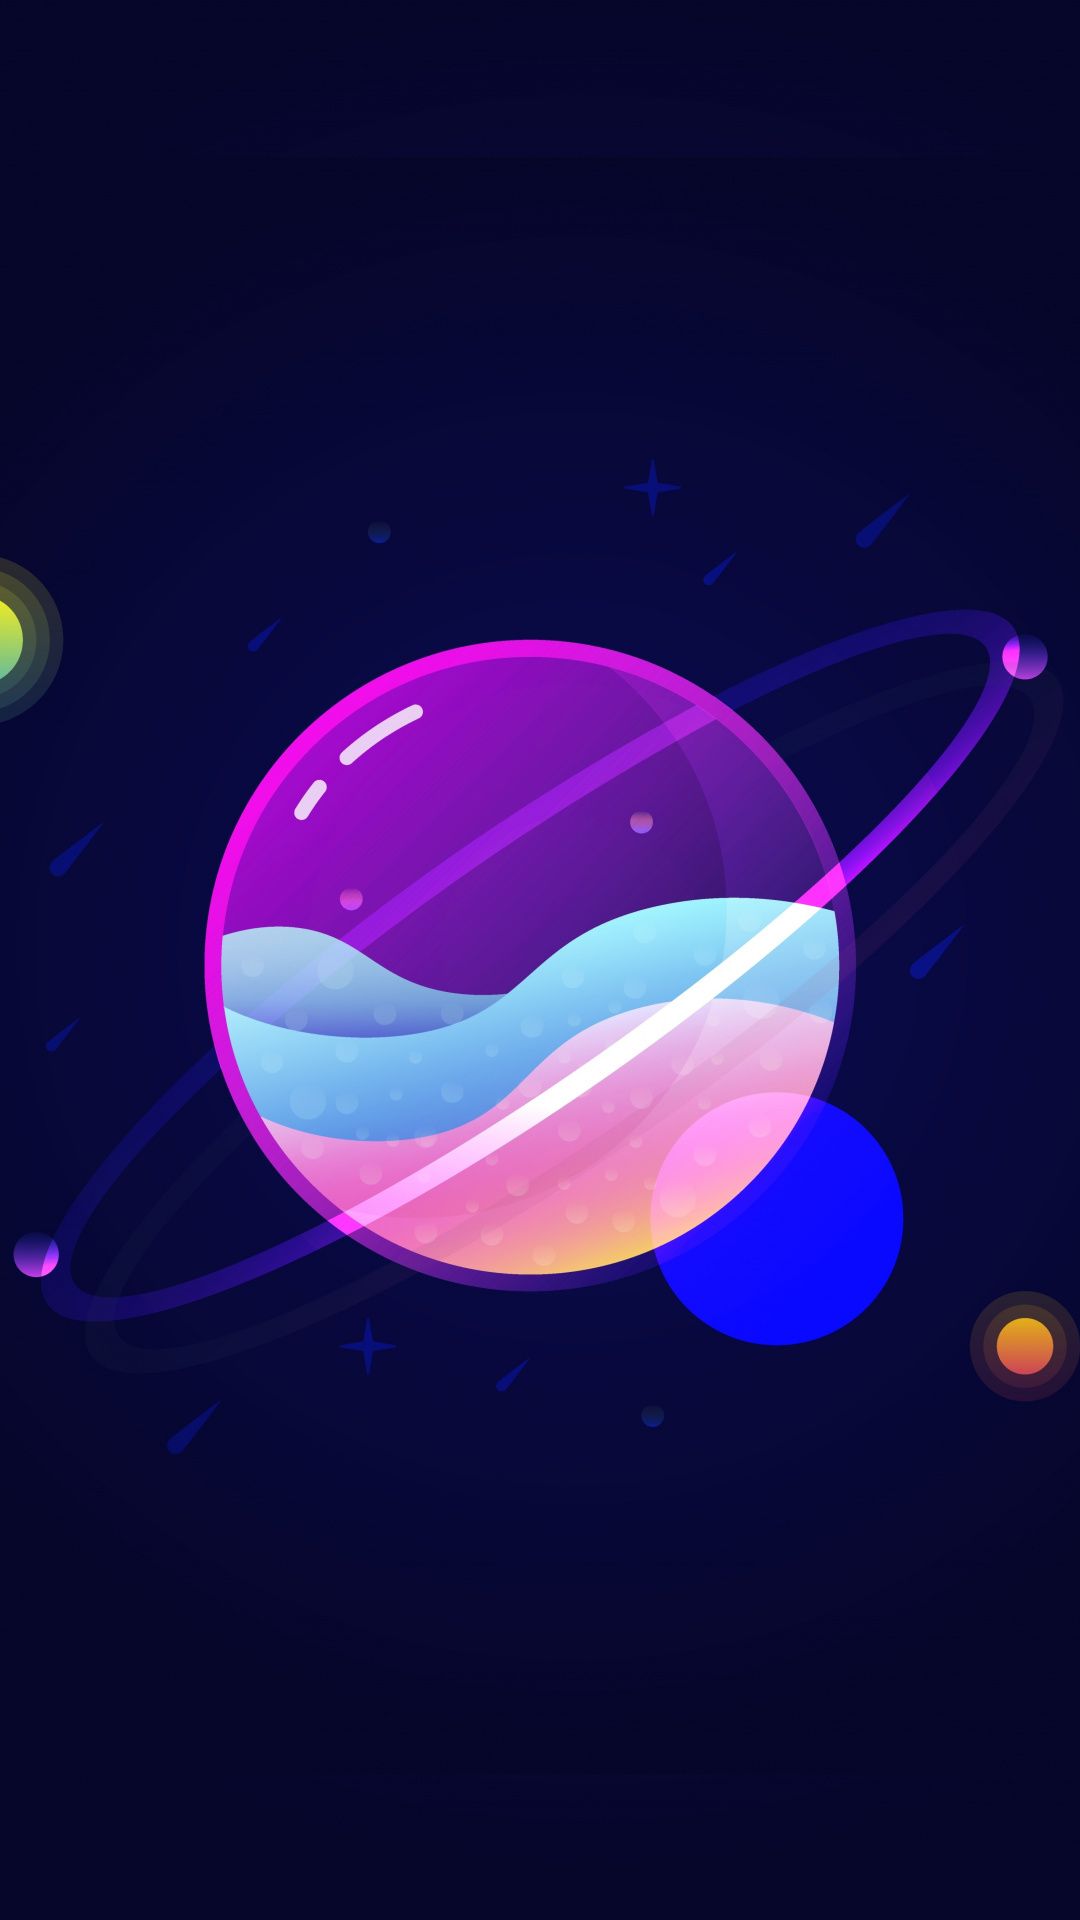 Aesthetic Planets Wallpapers - Wallpaper Cave